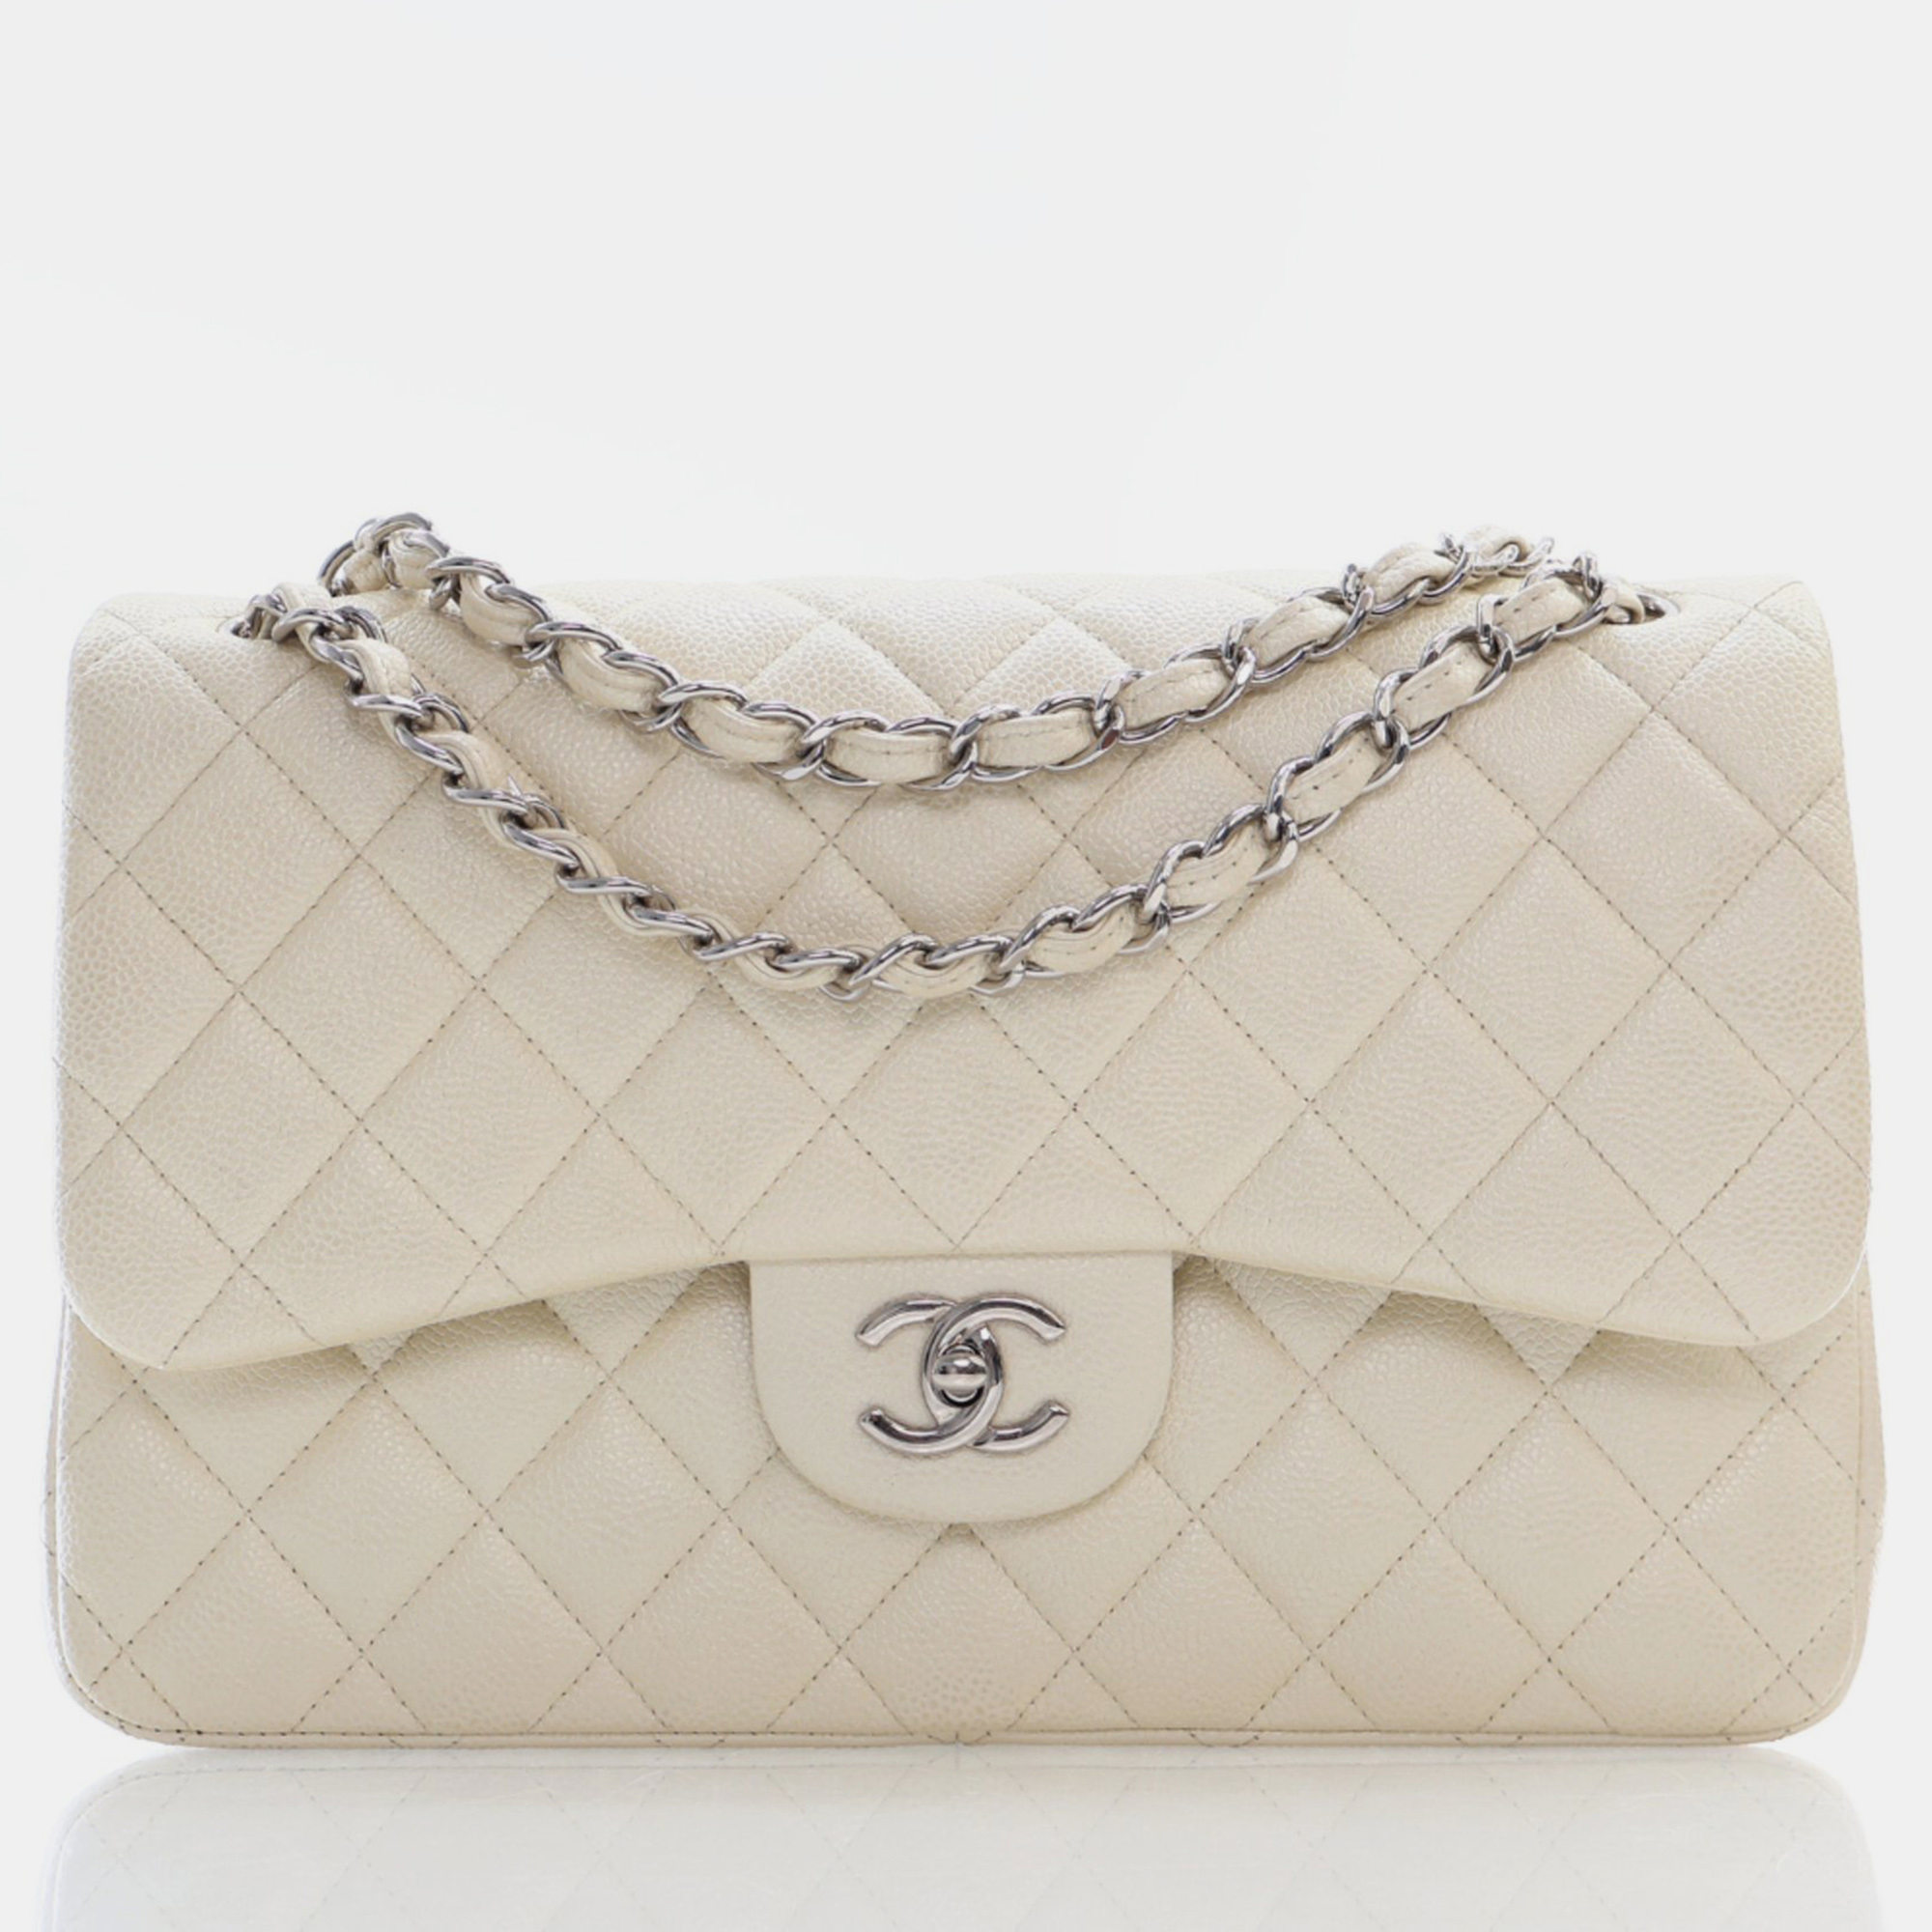 

Chanel White Caviar Leather Jumbo Classic Double Flap Shoulder Bags, Cream